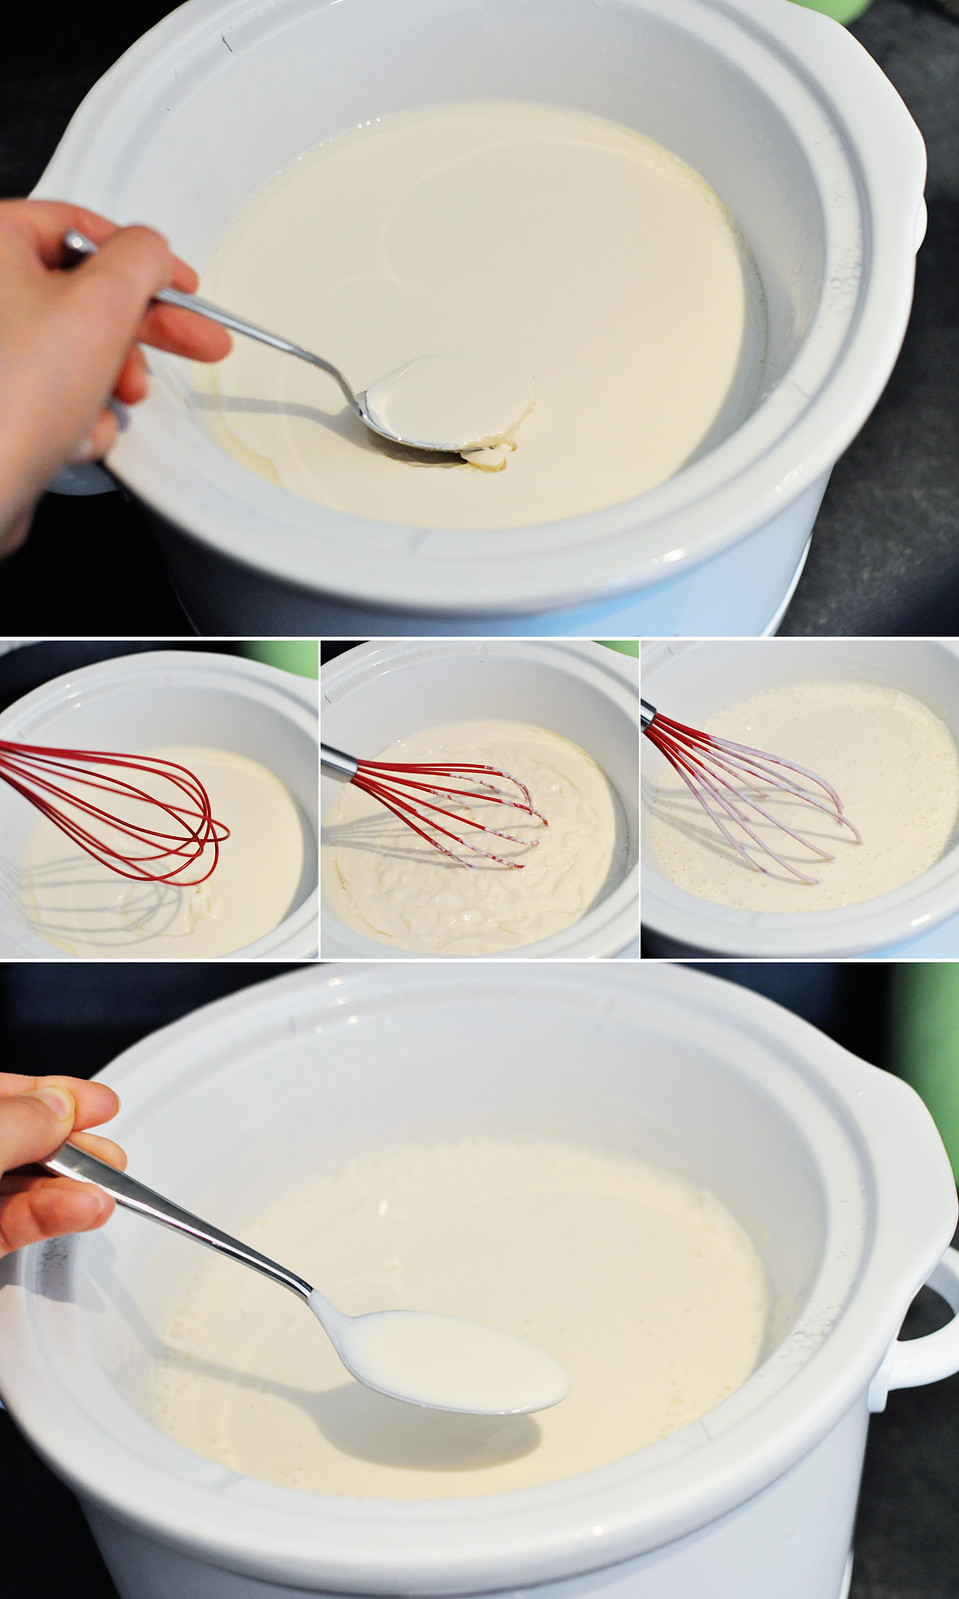 Whisk to smooth process